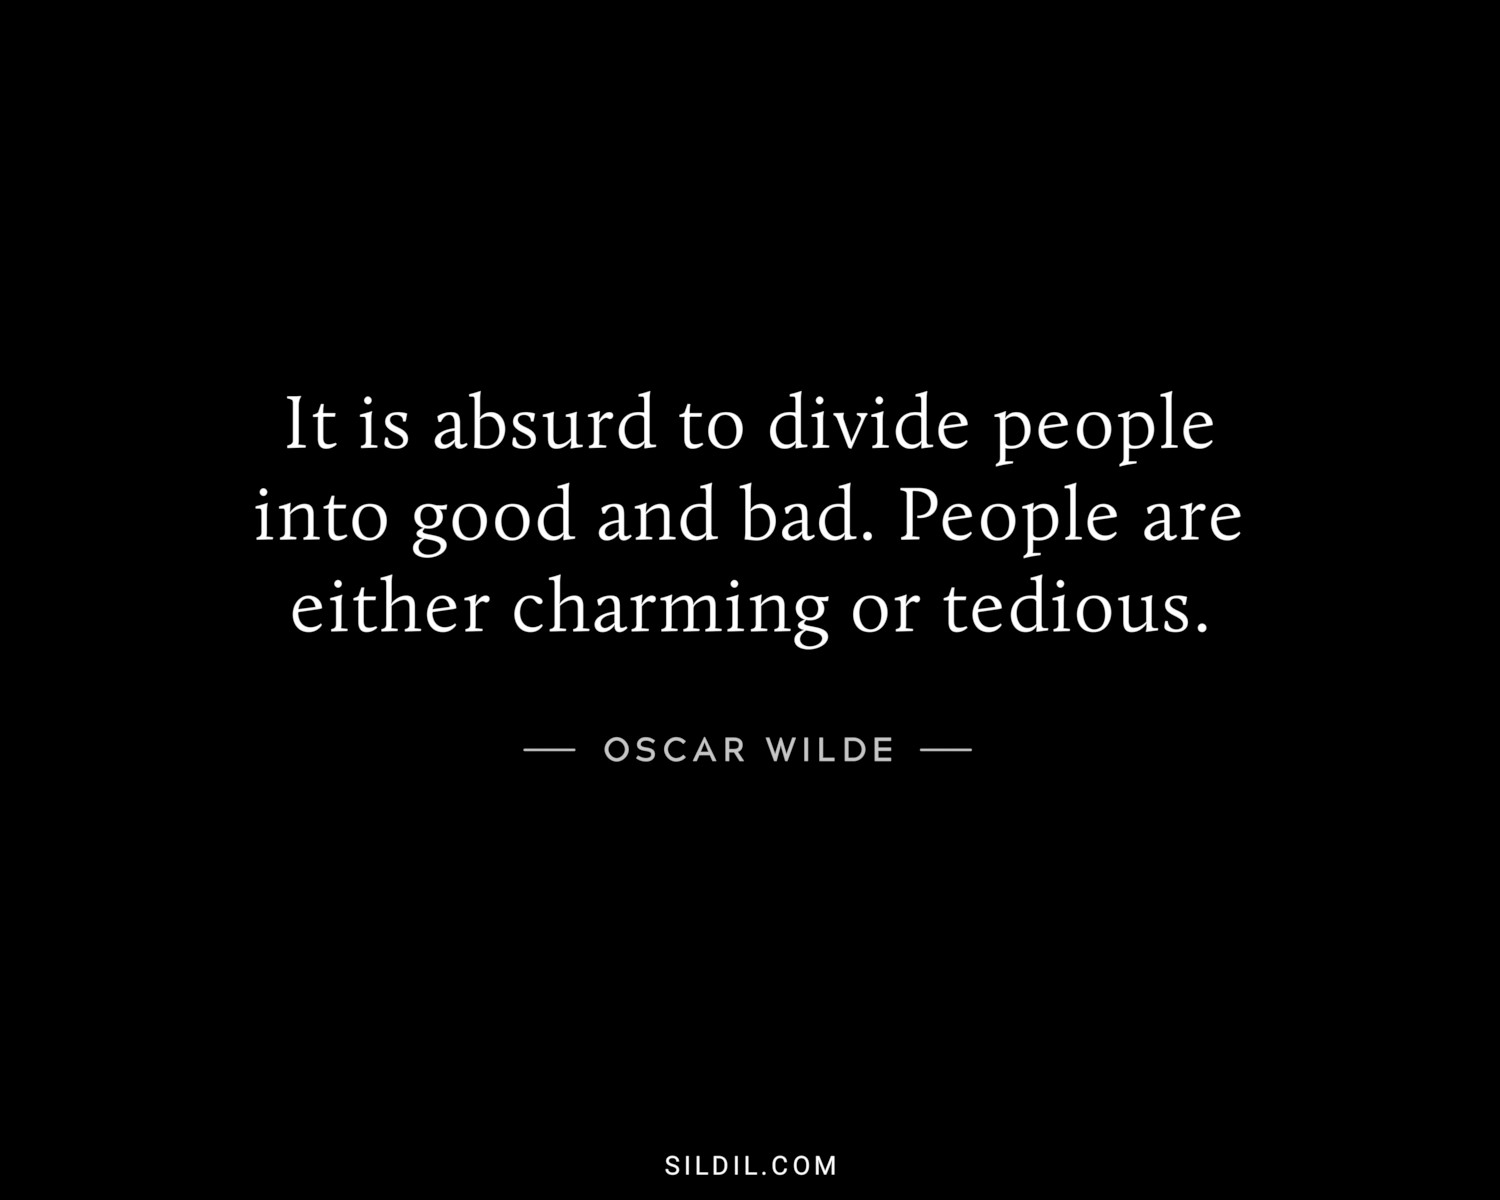 It is absurd to divide people into good and bad. People are either charming or tedious.